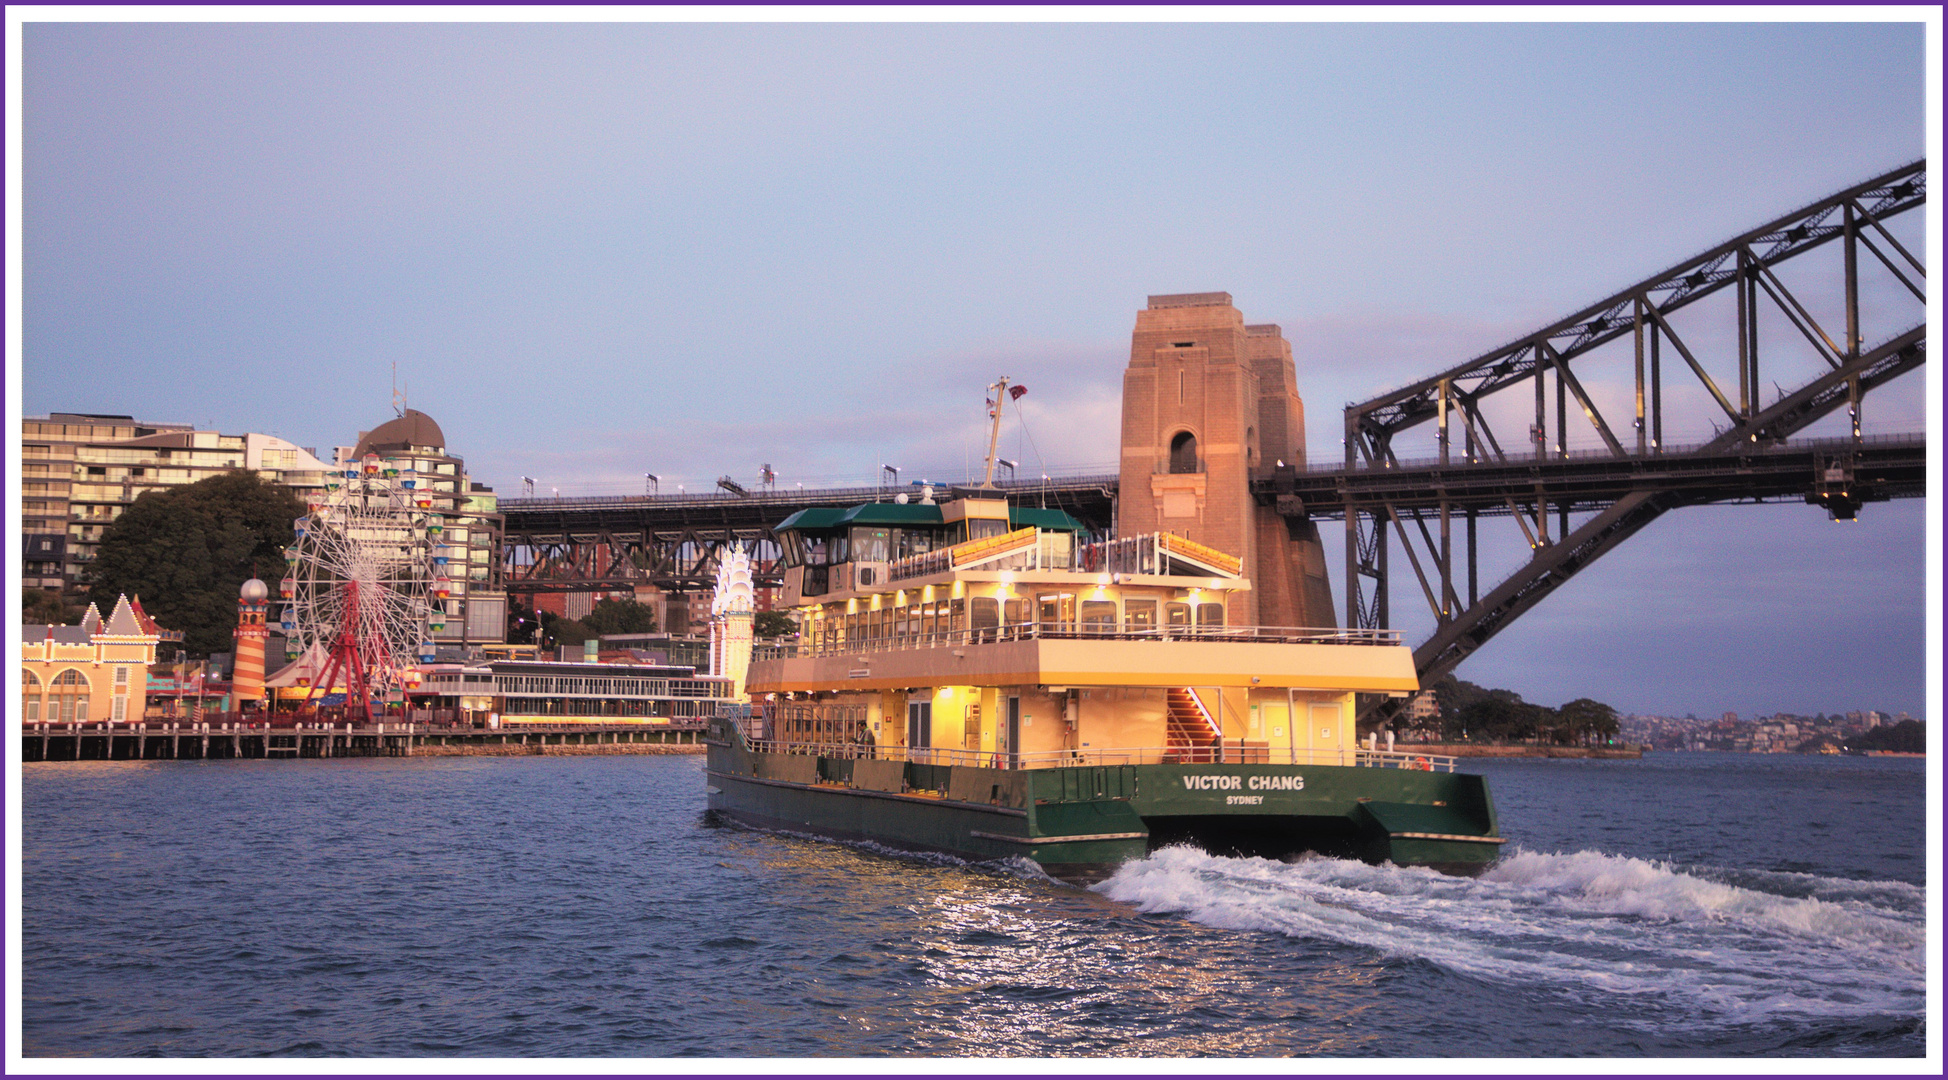 'Victor Chang' ferry on Sydney harbour